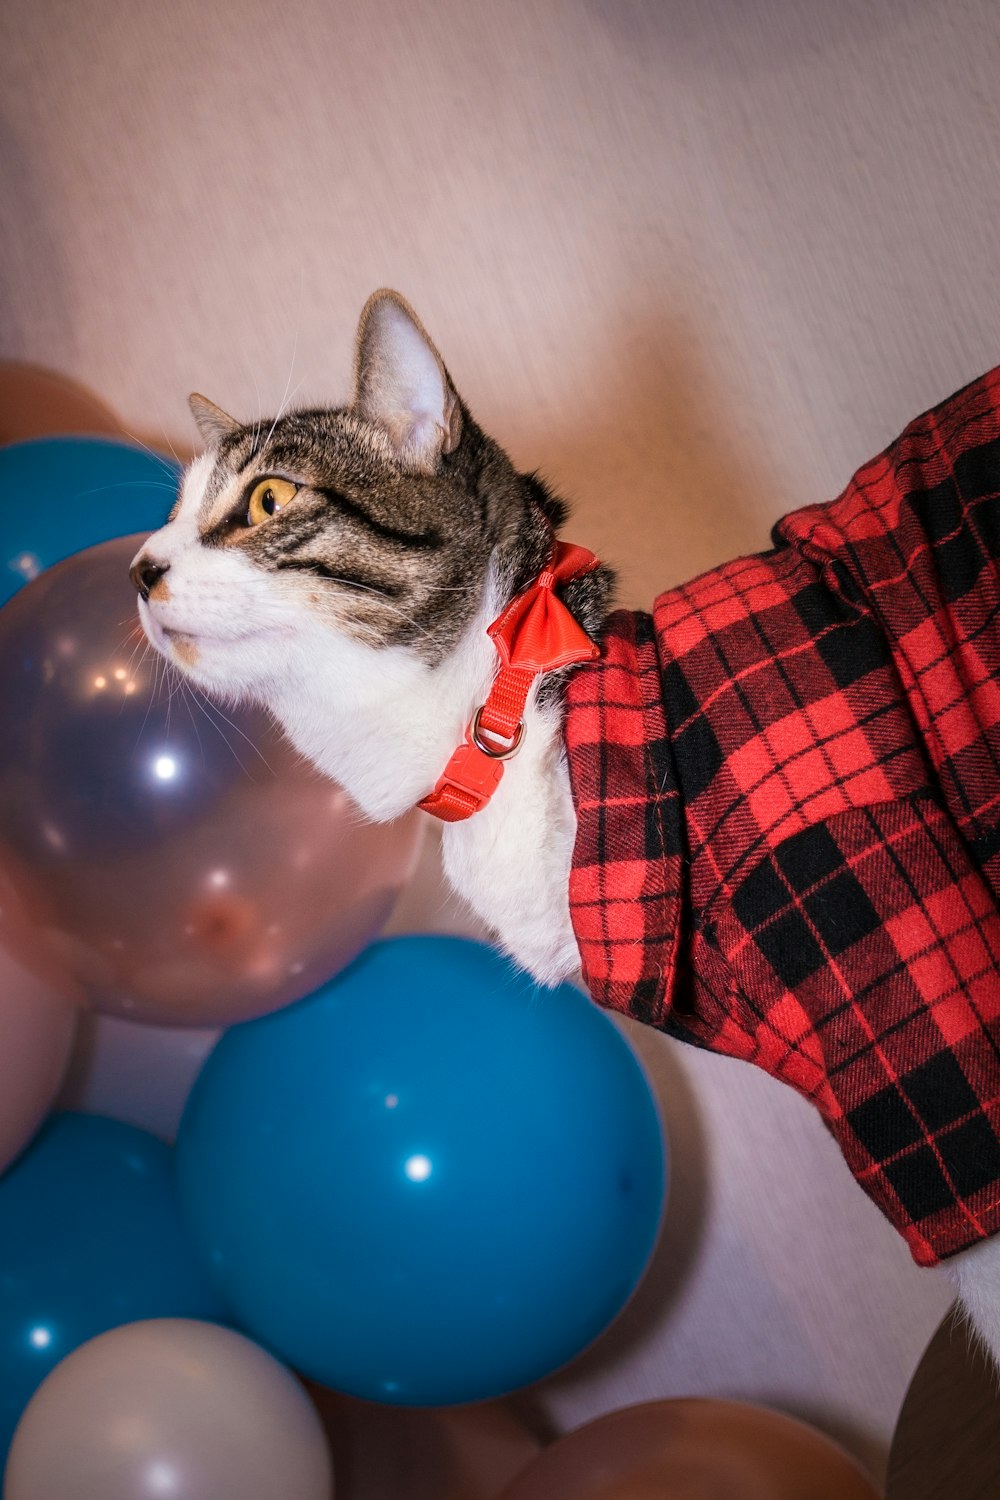 a cat wearing a red and black checkered shirt